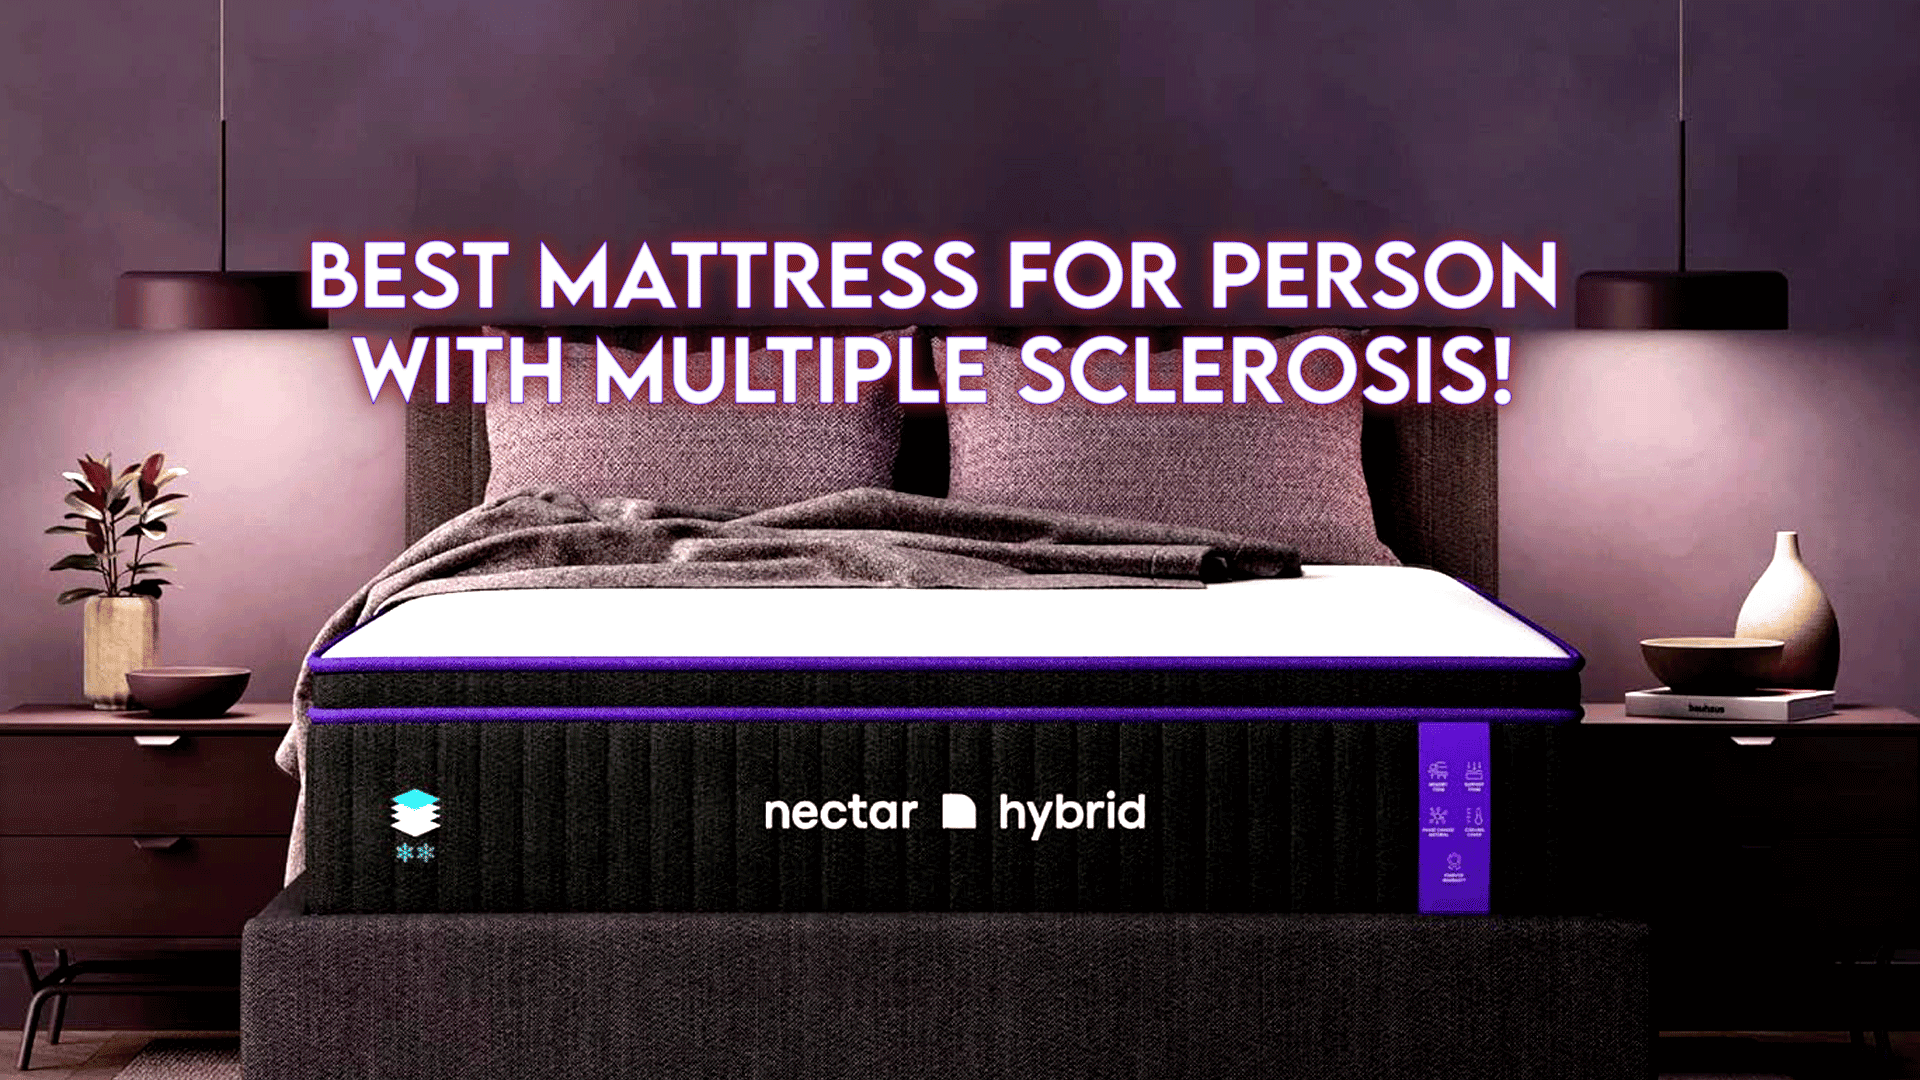 Best mattress for person with multiple sclerosis